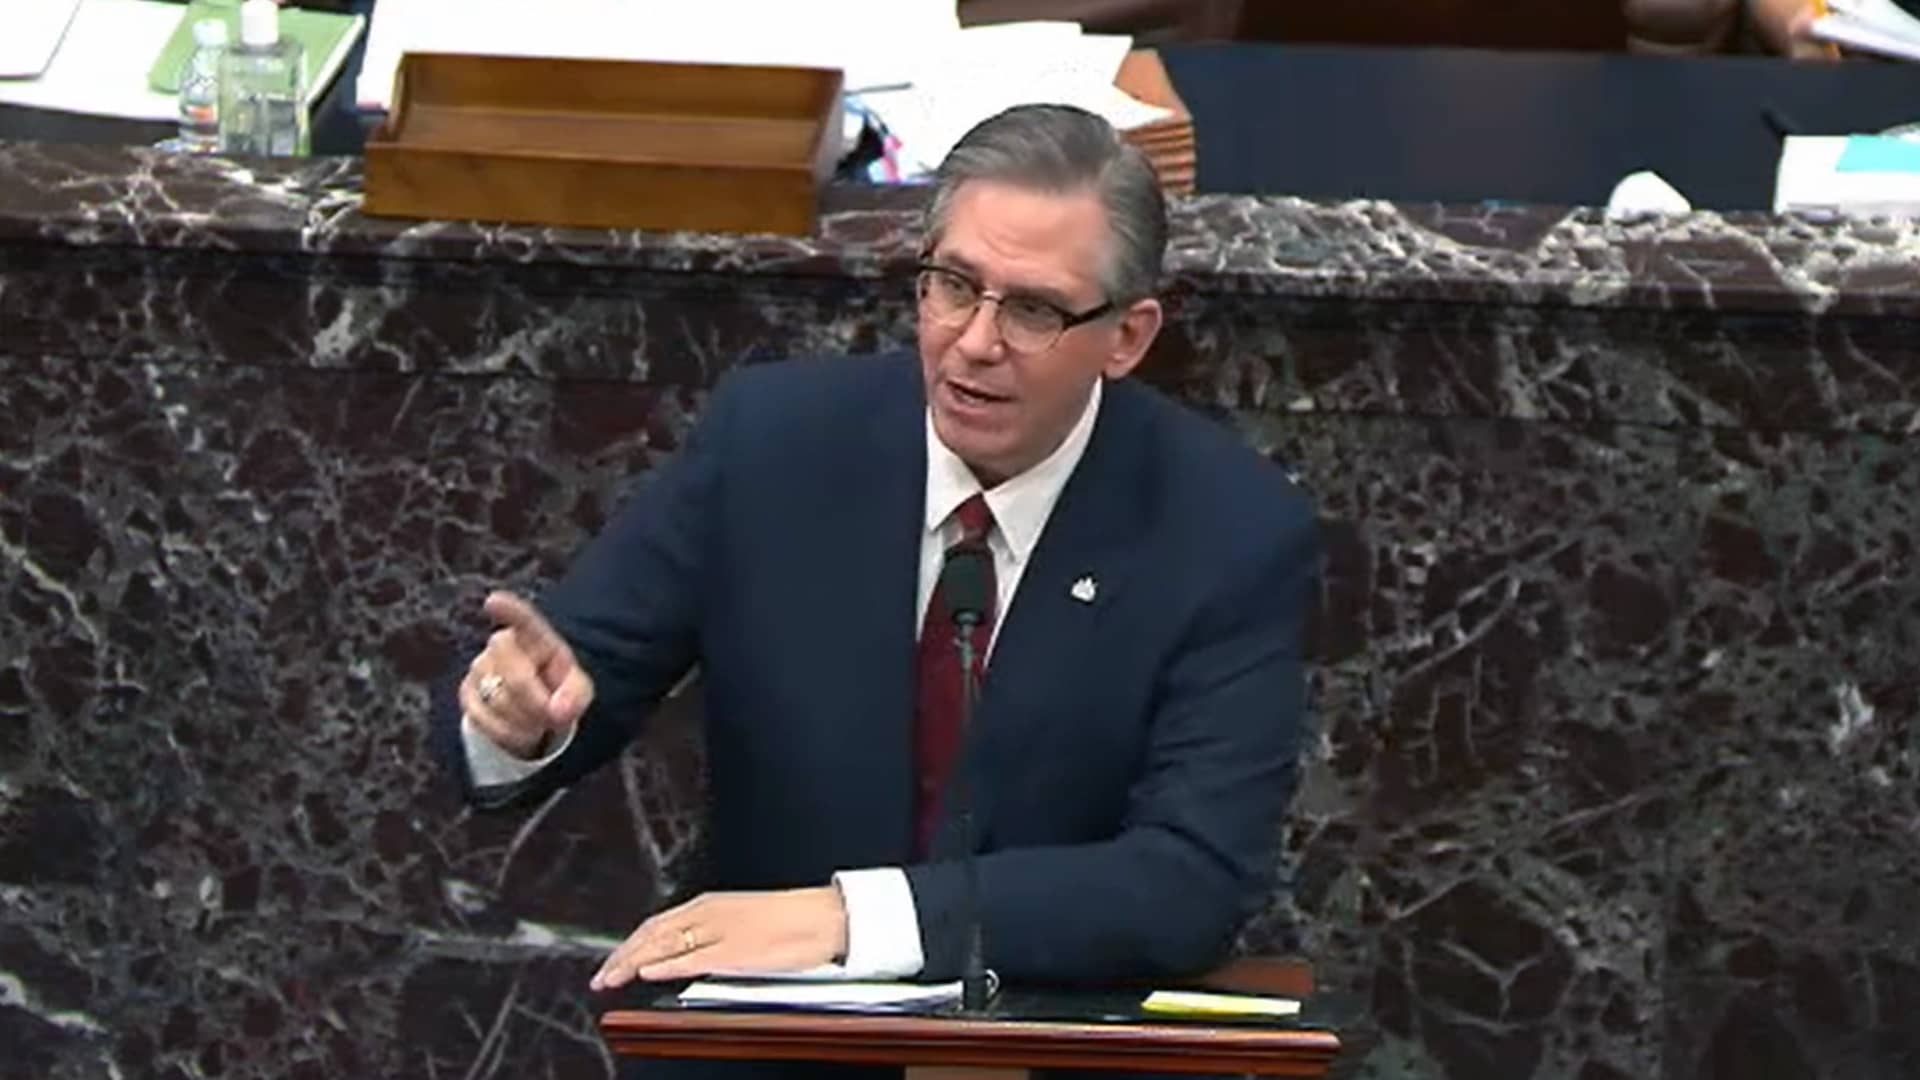 In this screenshot taken from a congress.gov webcast, Bruce Castor Jr., defense lawyer for former President Donald Trump, speaks on the fourth day of former President Donald Trump's second impeachment trial at the U.S. Capitol on February 12, 2021 in Washington, DC.